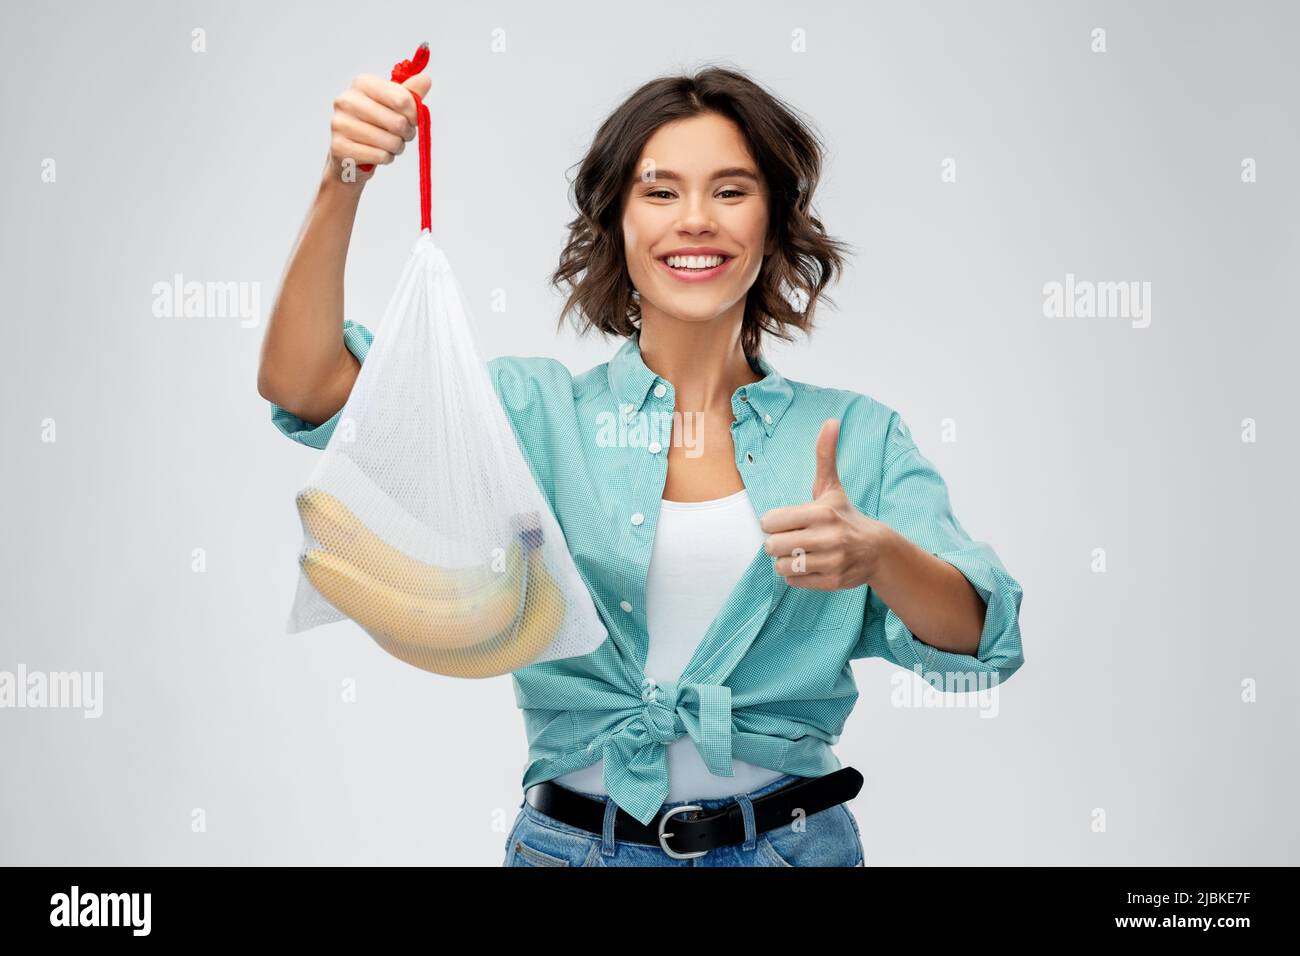 happy woman with bananas in reusable string bag Stock Photo